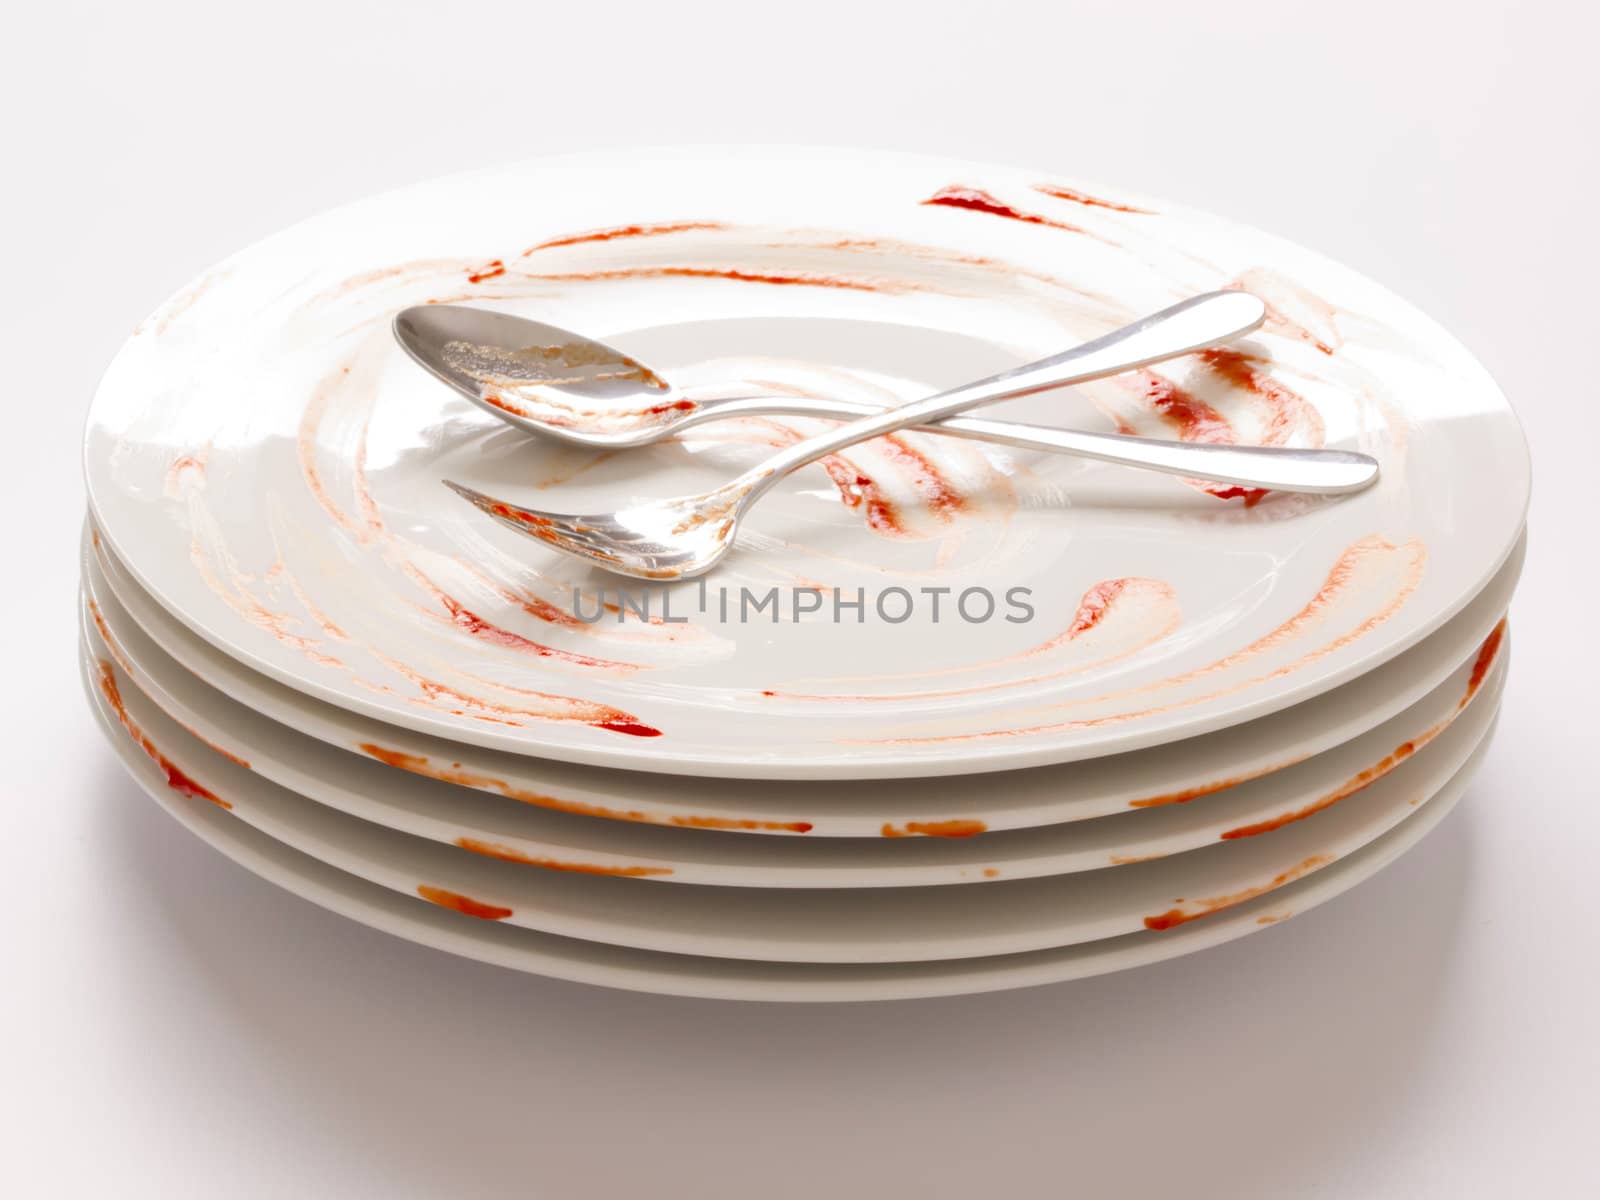 dirty plates by zkruger